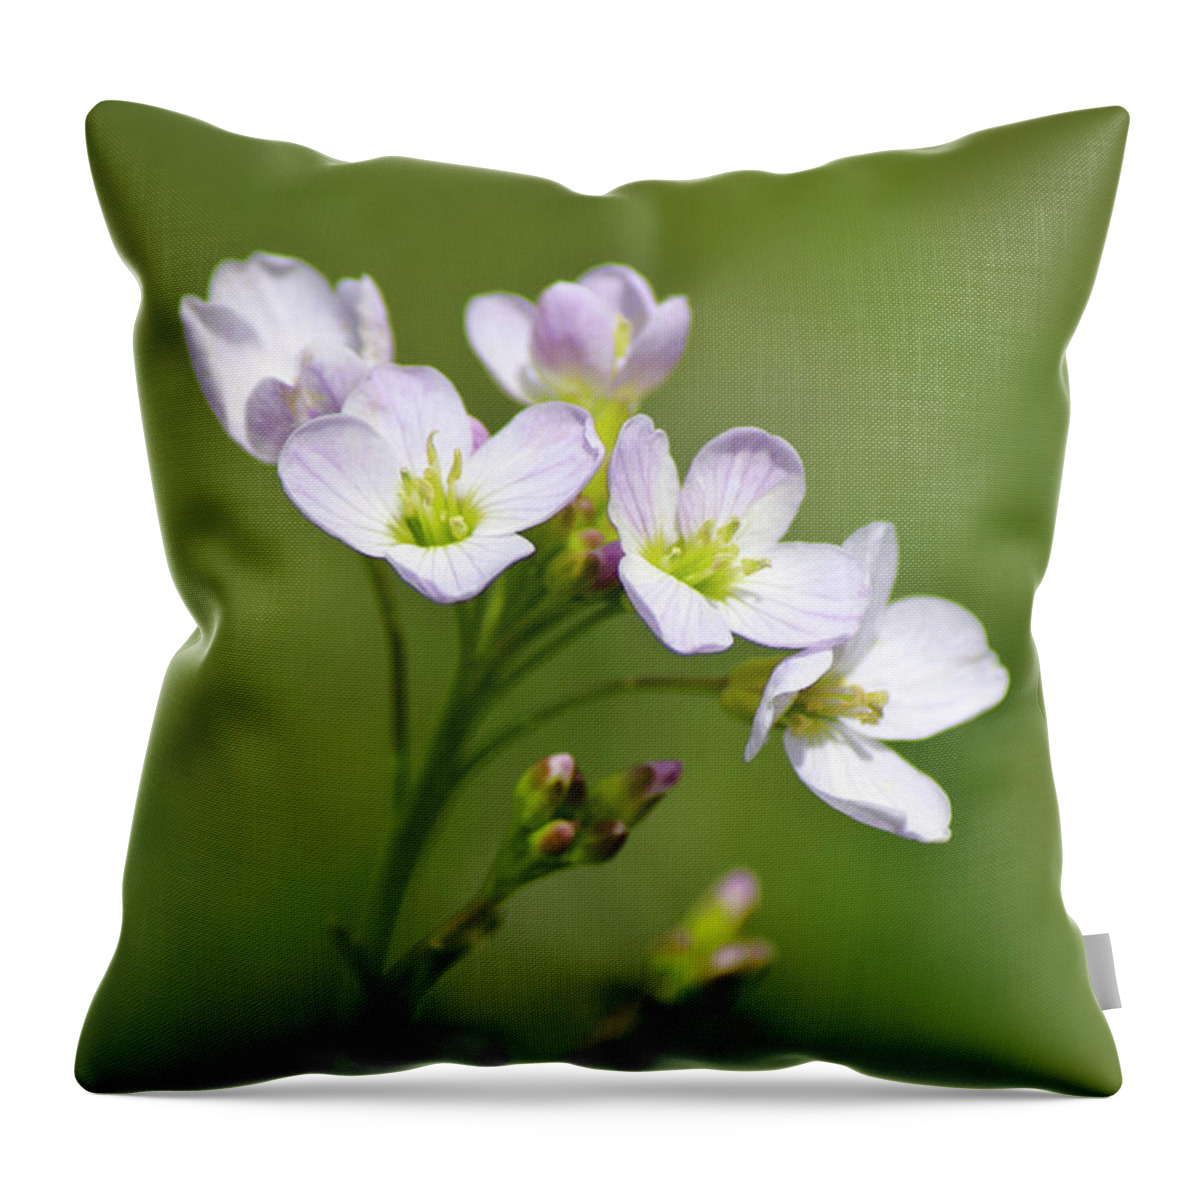 Flowers Throw Pillow featuring the photograph Lavender Cuckoo Flower by Christina Rollo